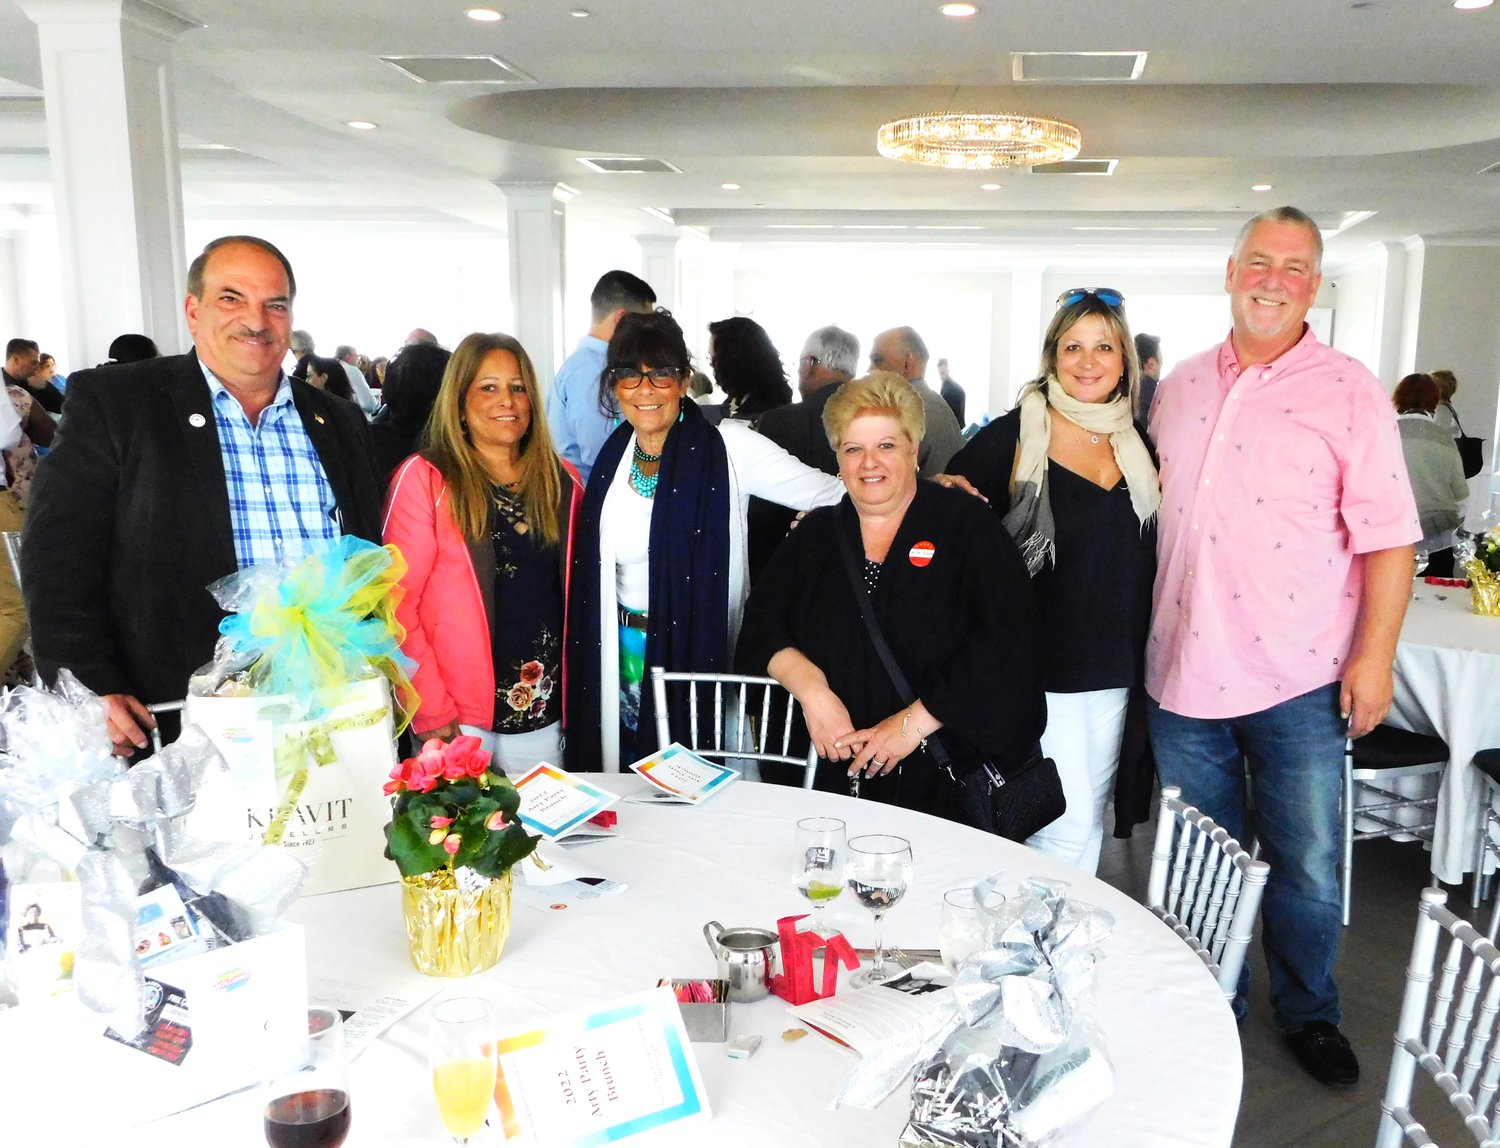 The Chamber of Commerce table at the Arty Party included John Nuzzi, Sr., Nancy Cameron, Monica Bennett, Pat Nuzzi, Jennifer Jerome, and Chamber president Ben Jackson.